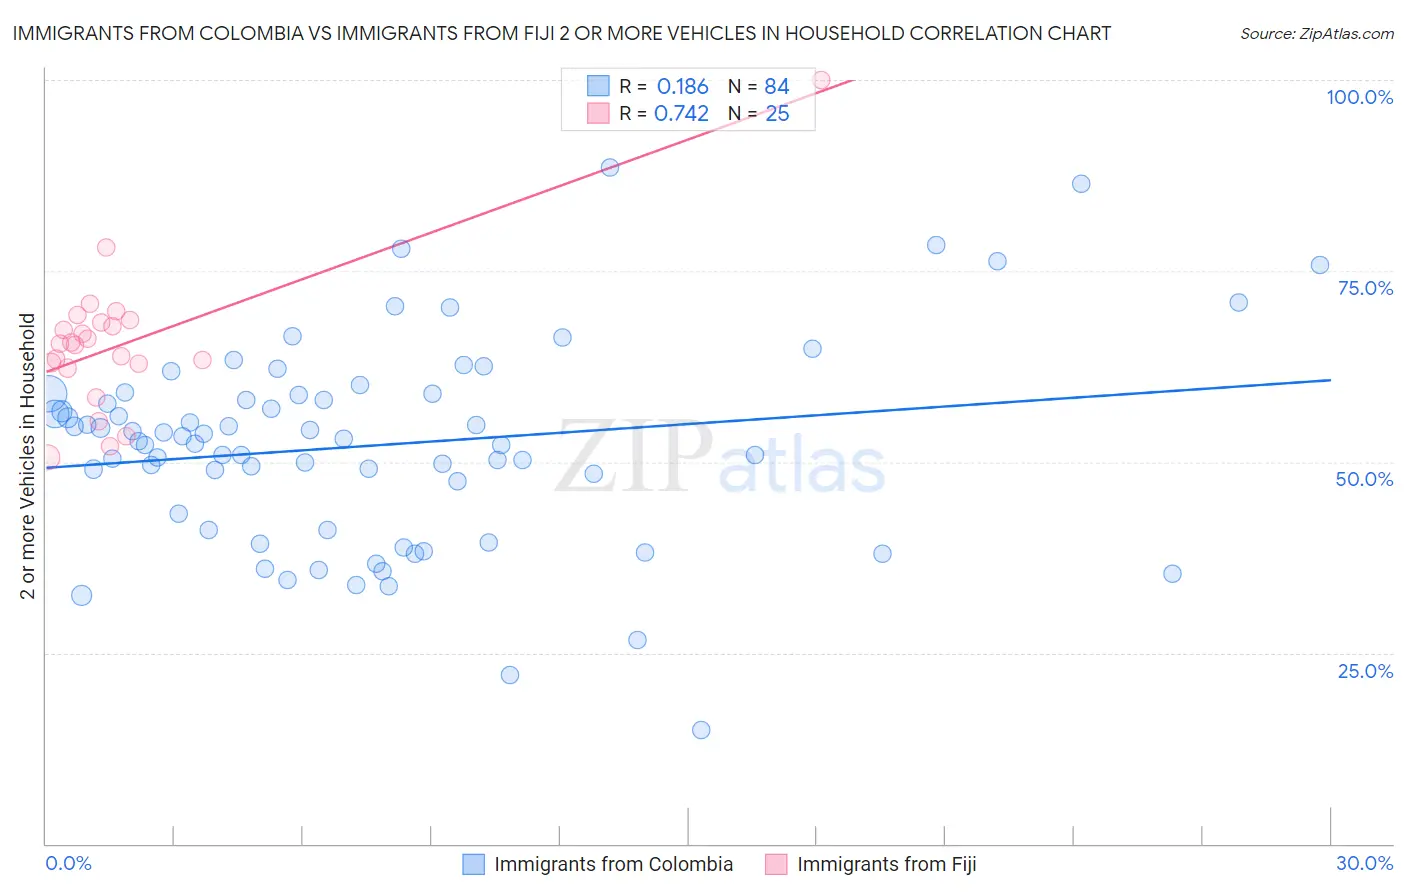 Immigrants from Colombia vs Immigrants from Fiji 2 or more Vehicles in Household